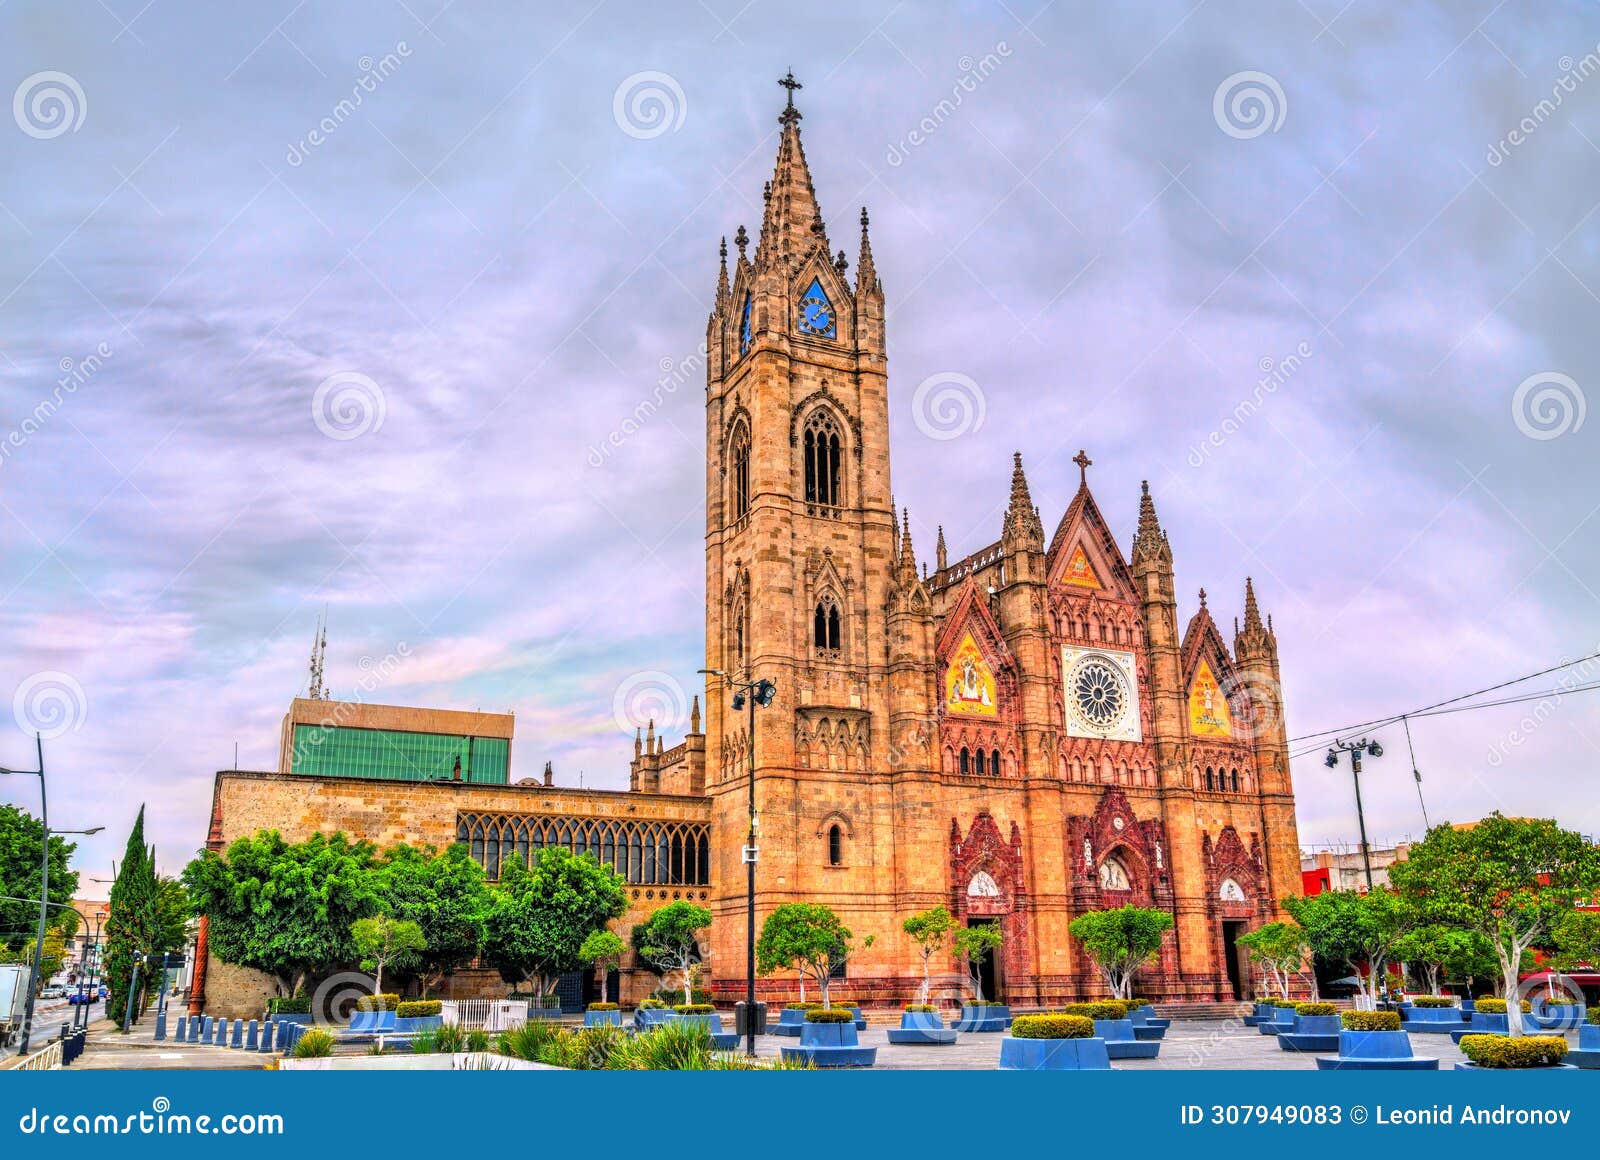 expiatory temple of the blessed sacrament in guadalajara, mexico